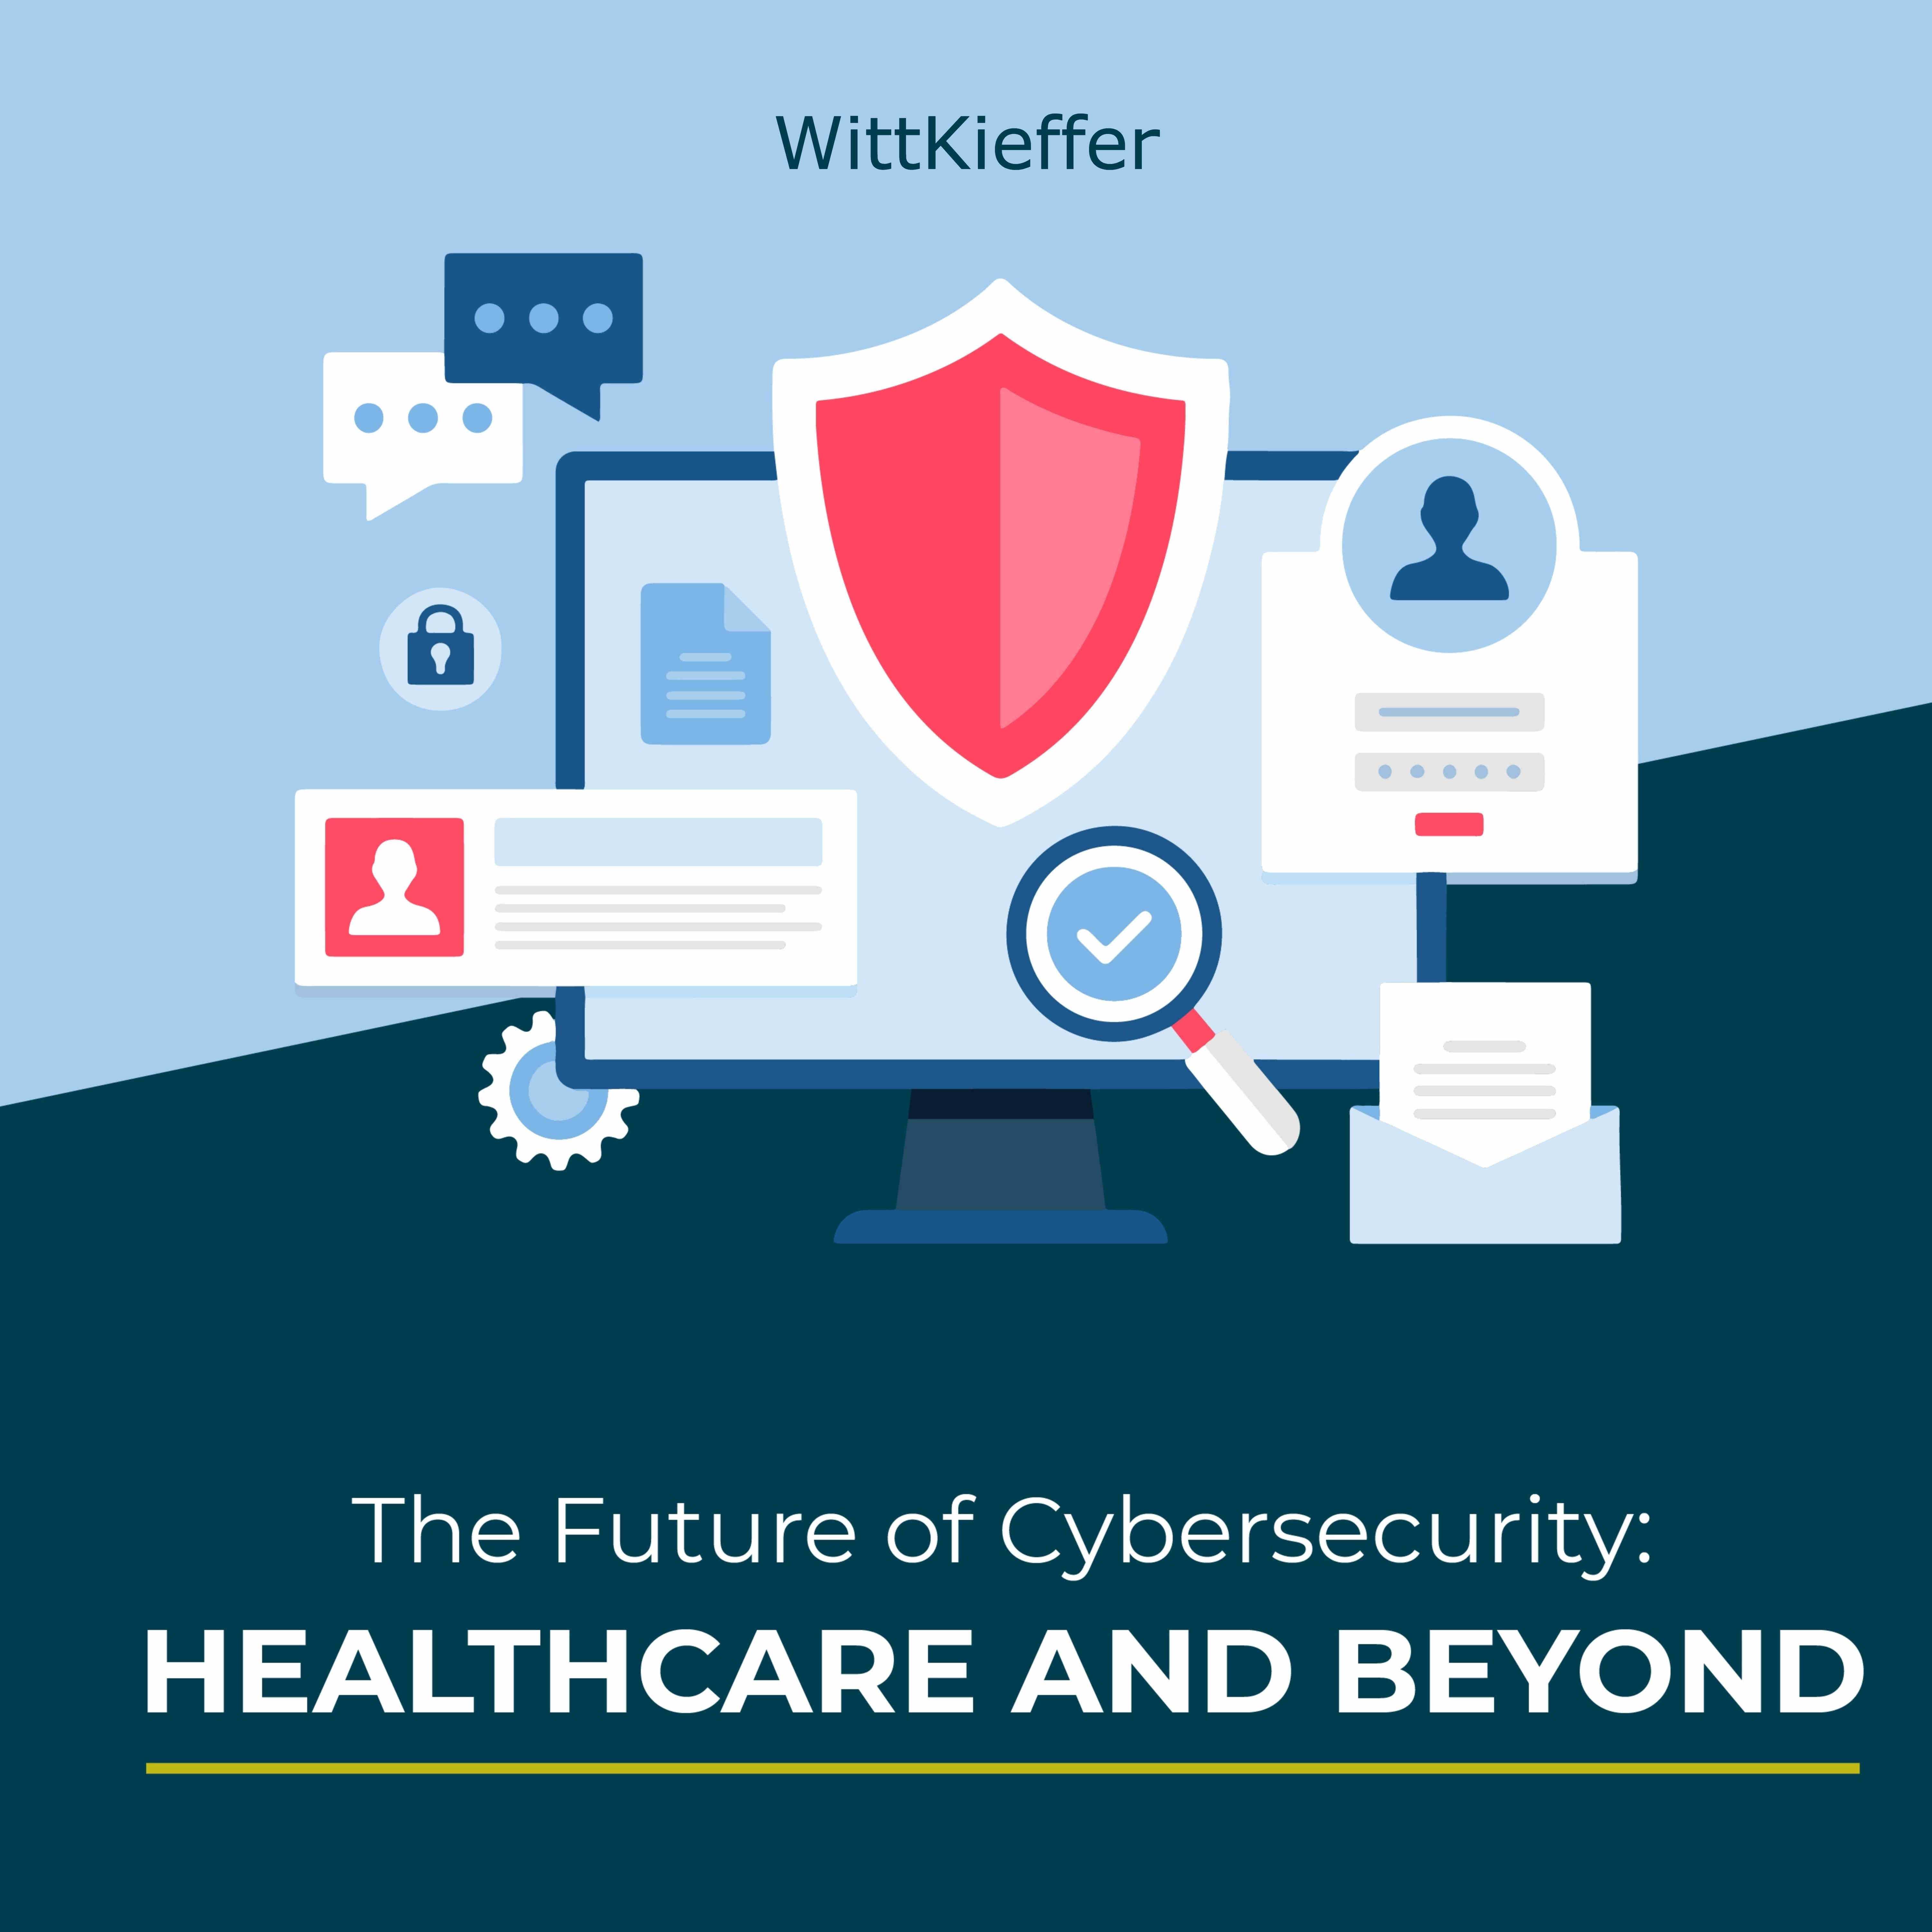 The Future of Cybersecurity: Healthcare and Beyond